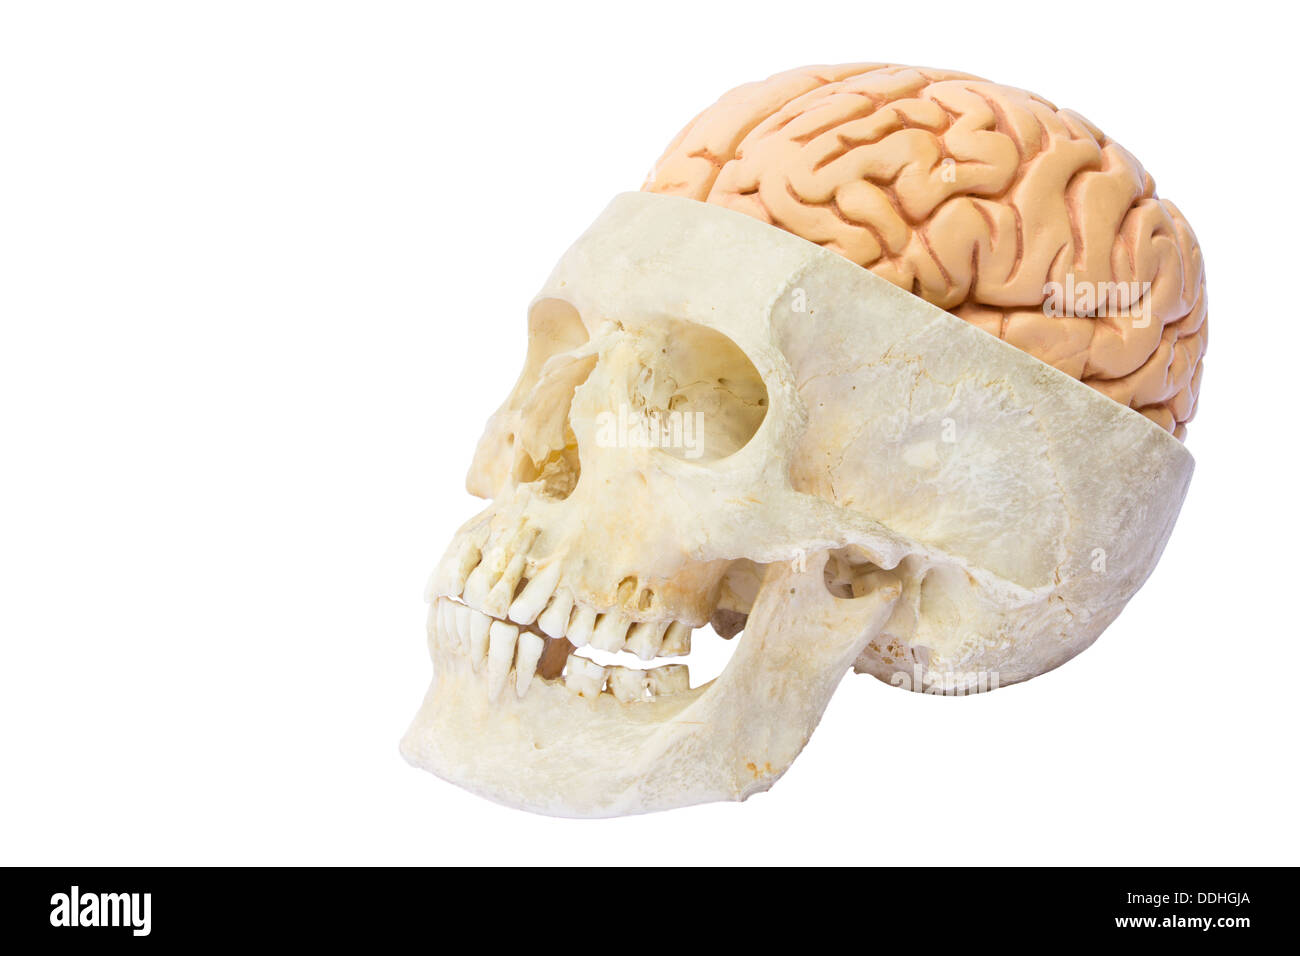 Human skull with artificial brains Stock Photo